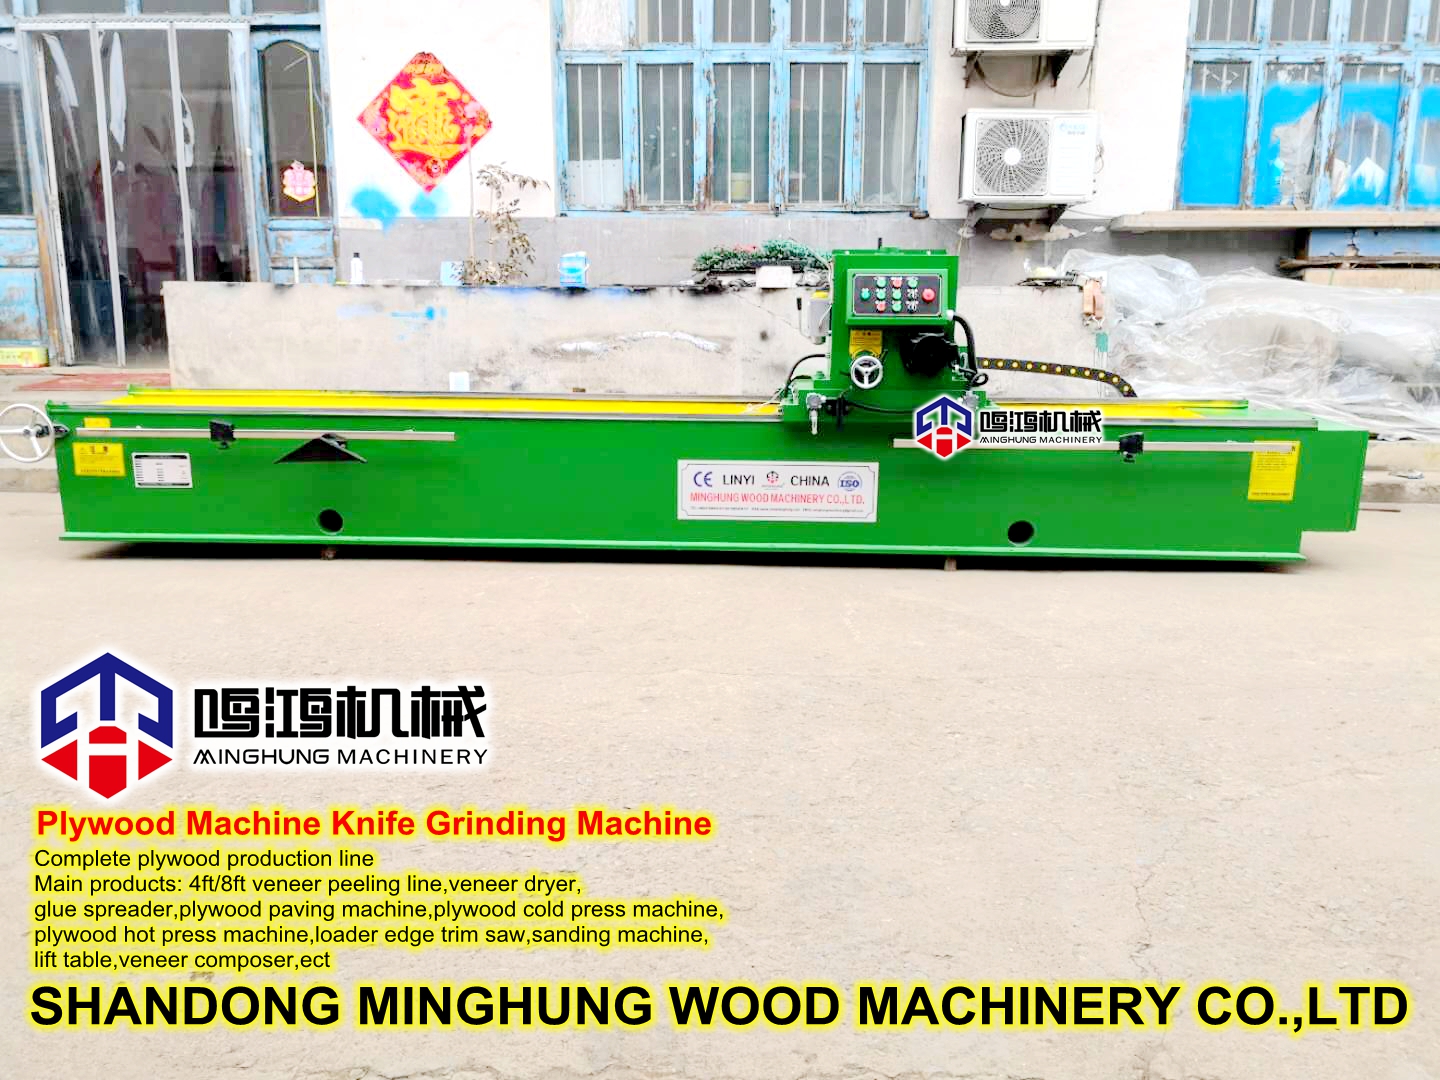 Straight Knife Grinding Machine for Knives